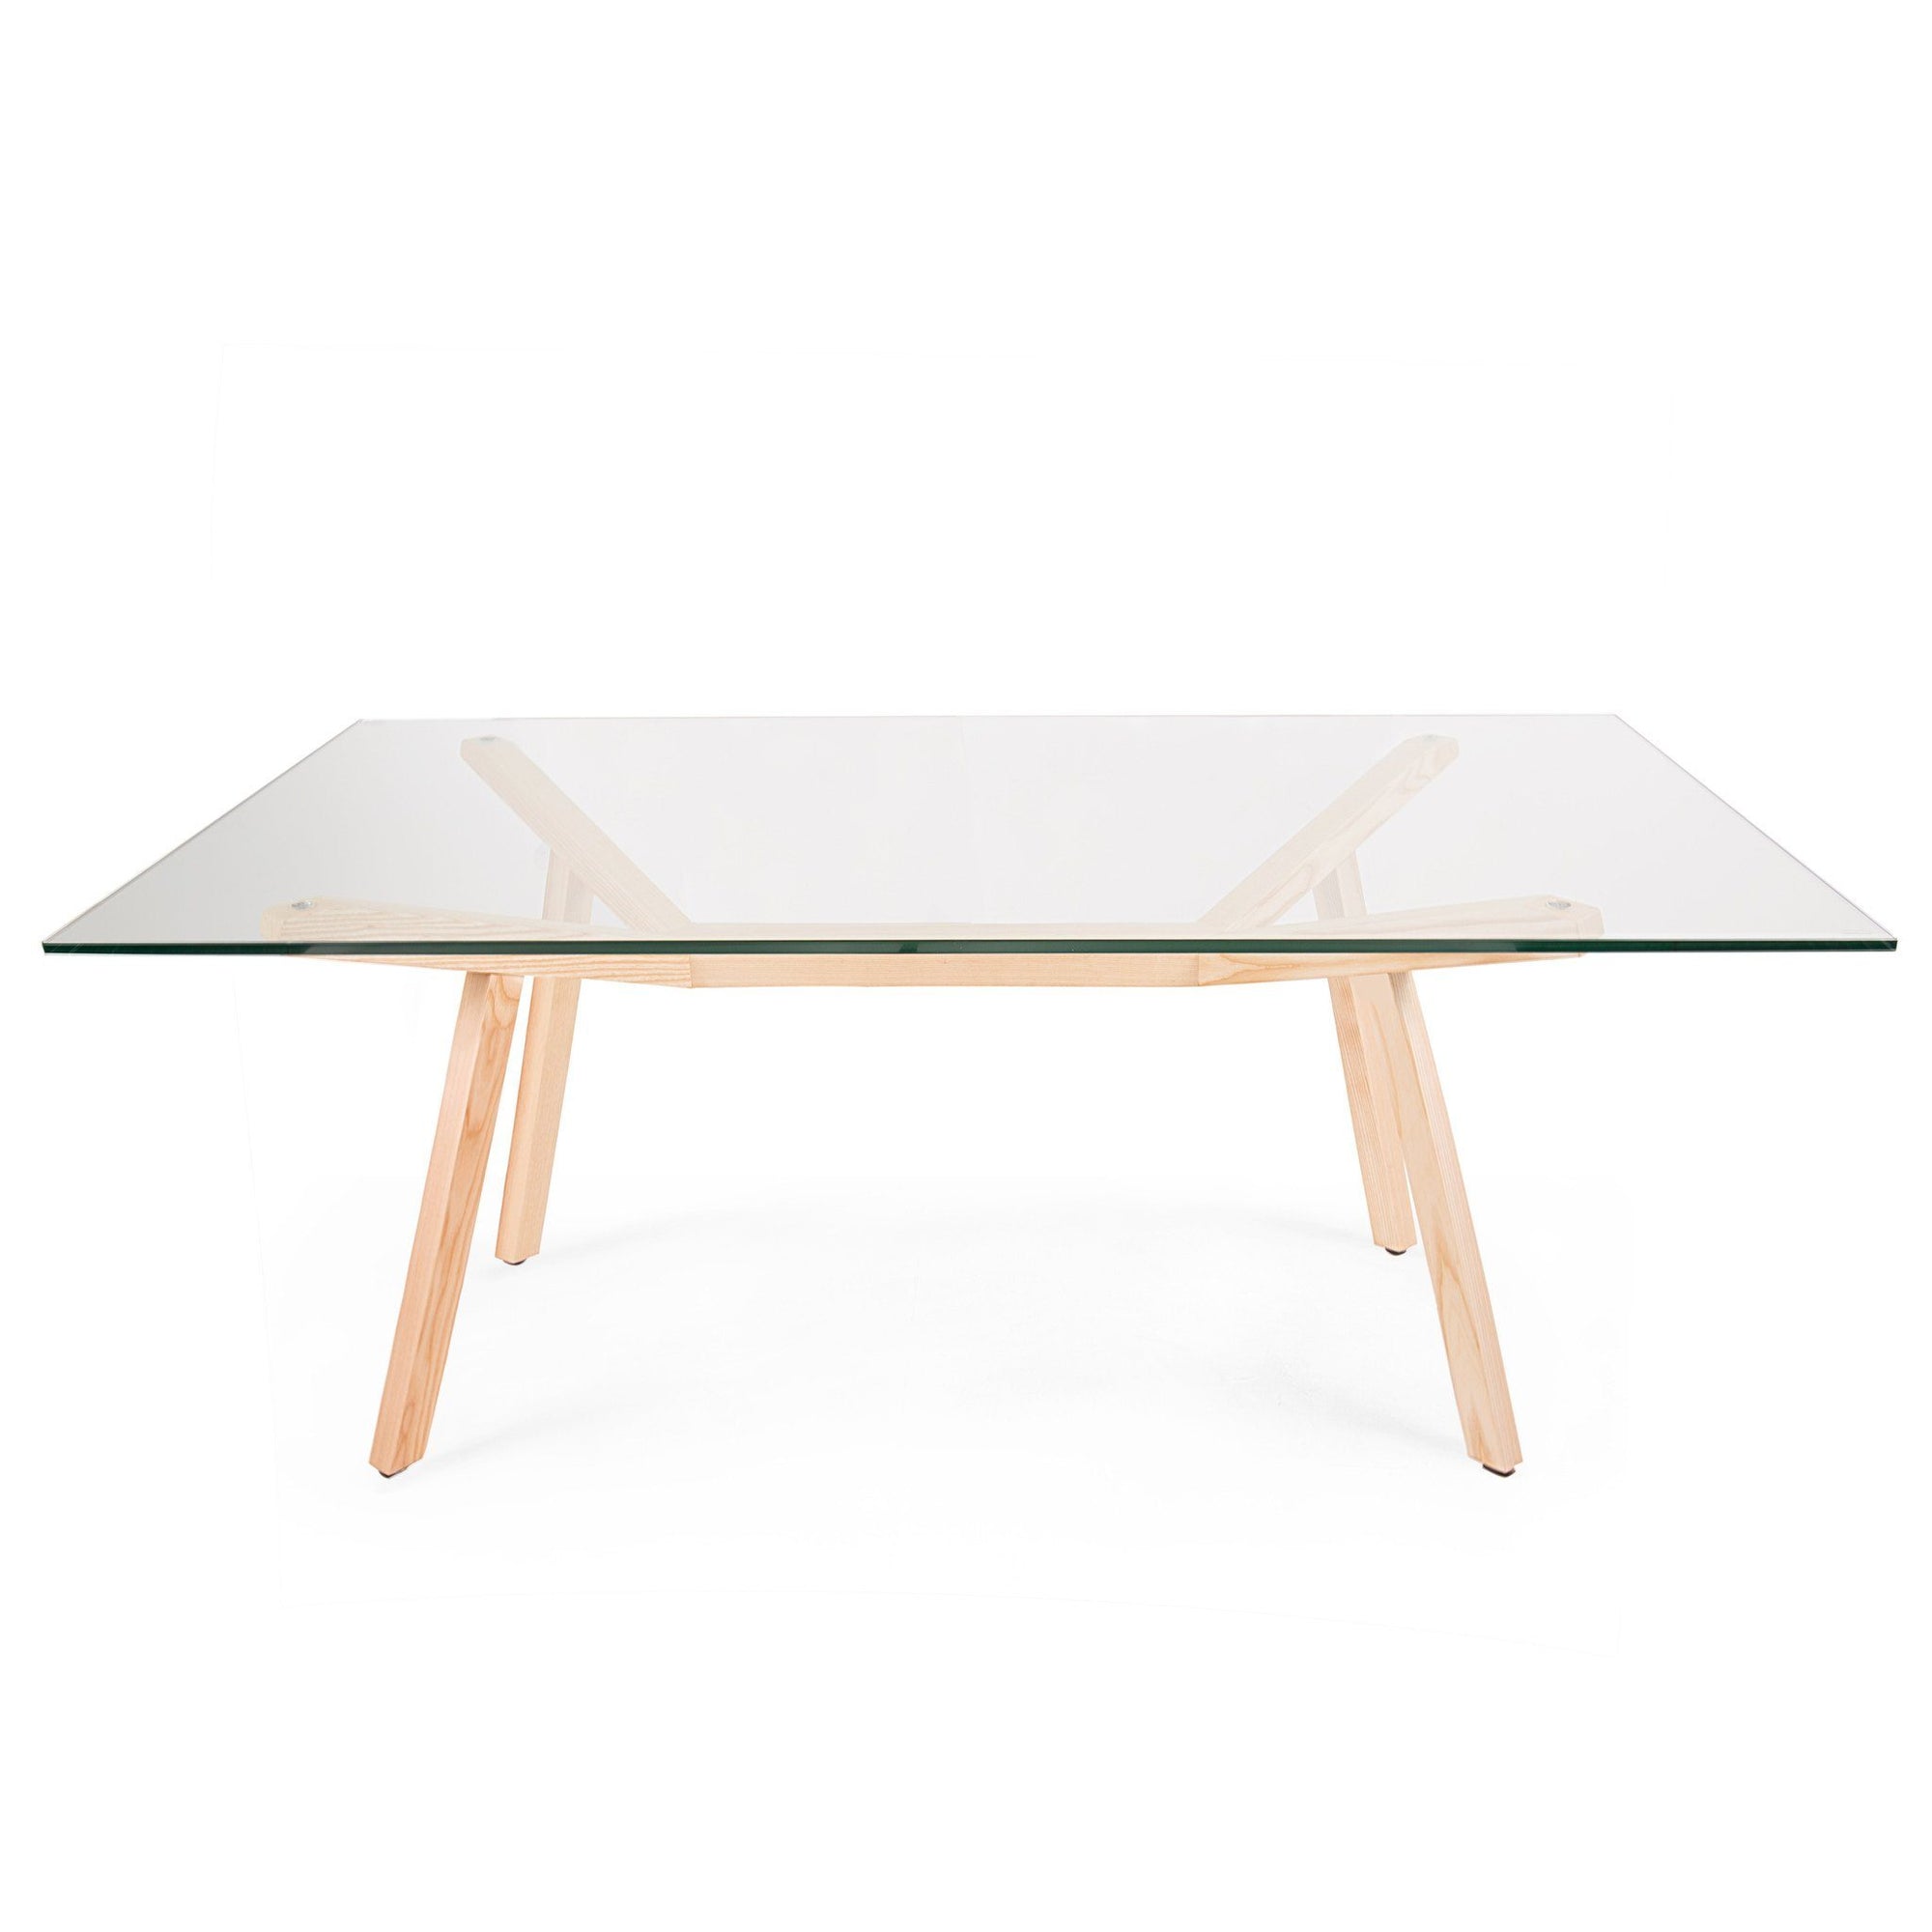 Sean Dix Style Forte Dining Table 180cm (Glass / Natural Ash Frame) - Nathan Rhodes Design